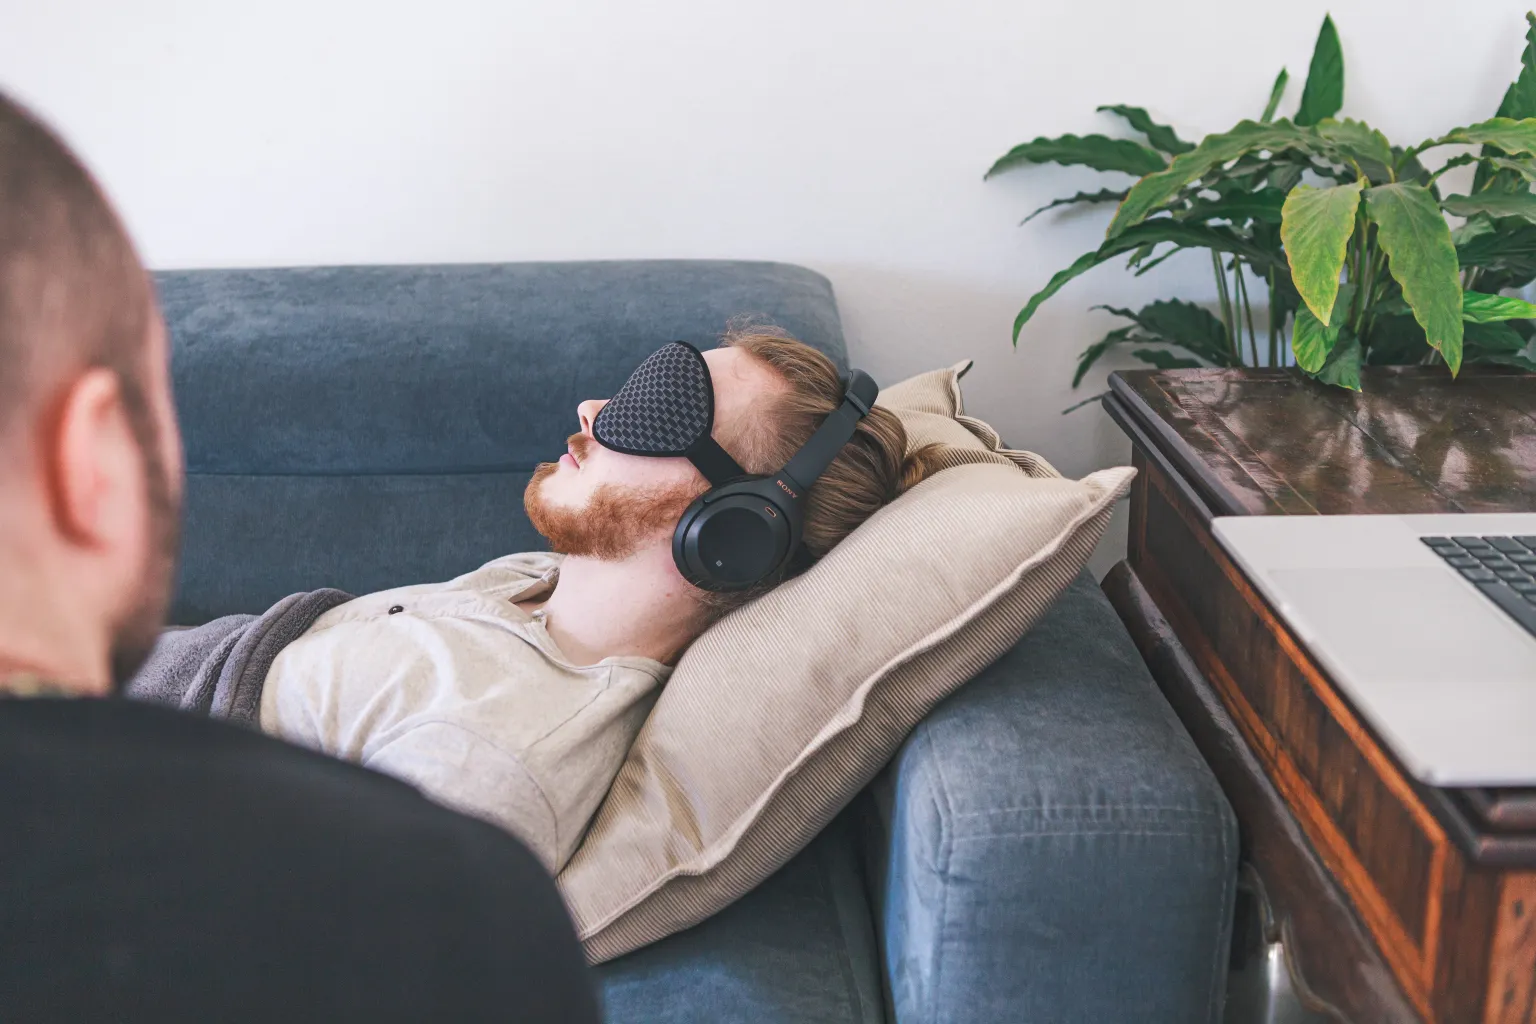 Whilst wearing an eye mask, each individual listens to a carefully designed series of musical programs, and receives person-centred support from trained psychotherapists.